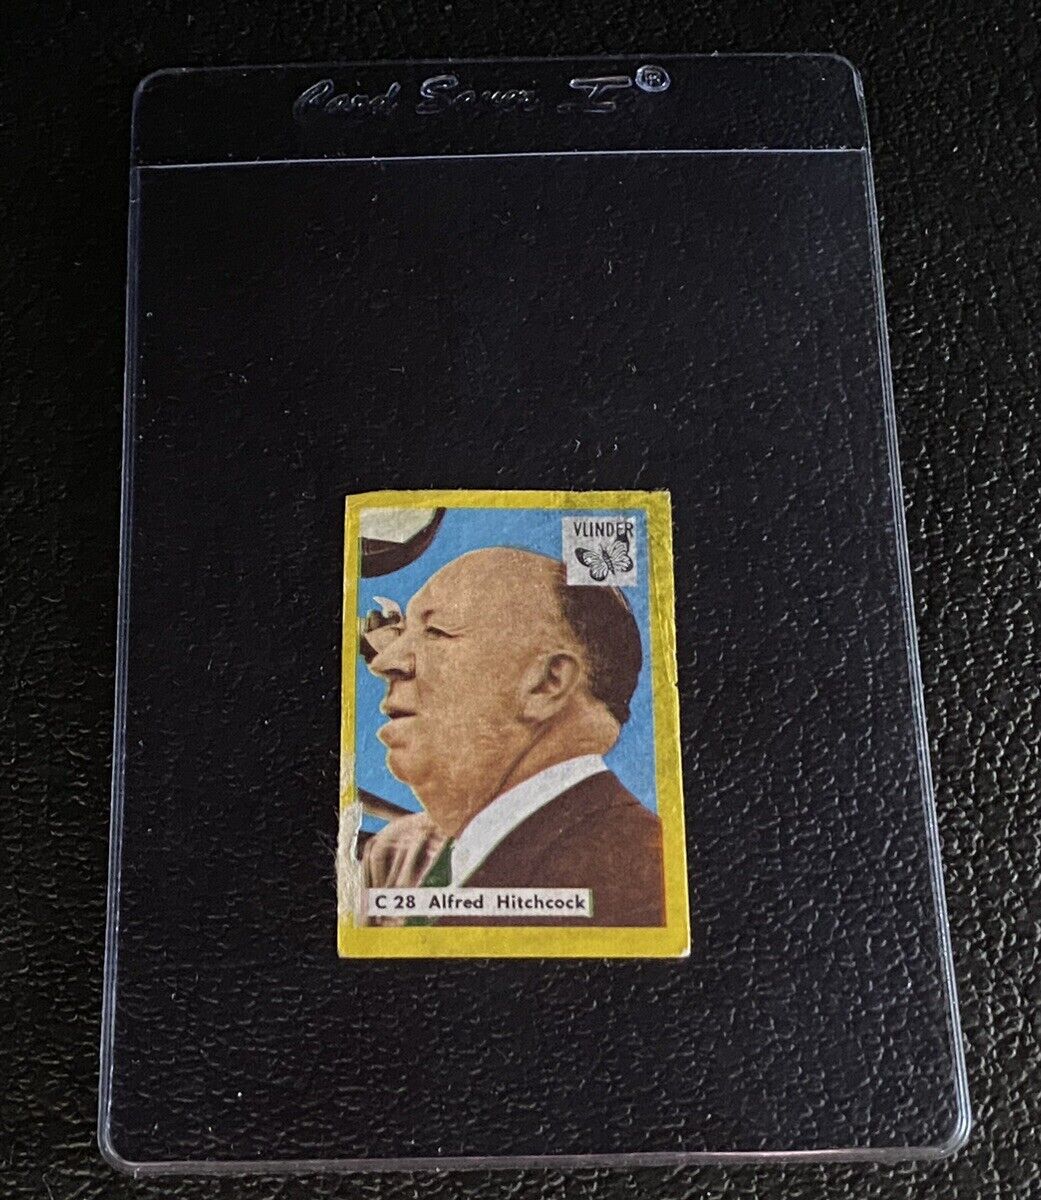 Alfred Hitchcock 2nd Card 1966 Vlinder C 28 Match Box Label Cover Horror Poor